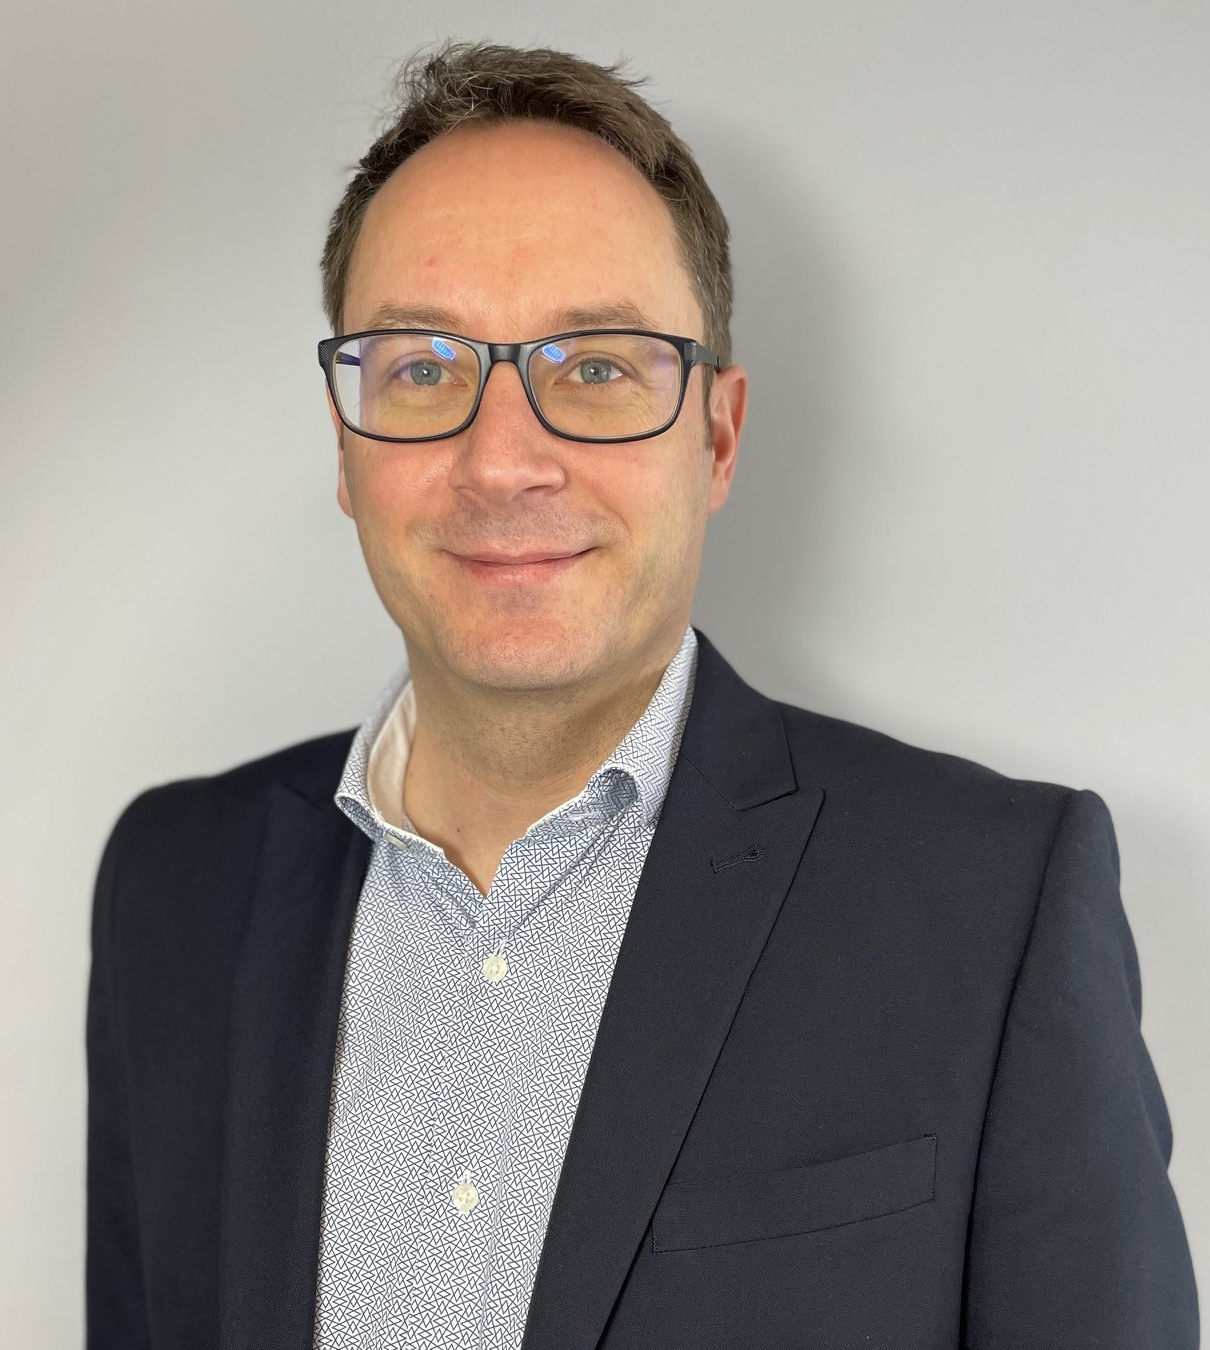 JULIUS RUTHERFOORD APPOINTS NEW FINANCE DIRECTOR